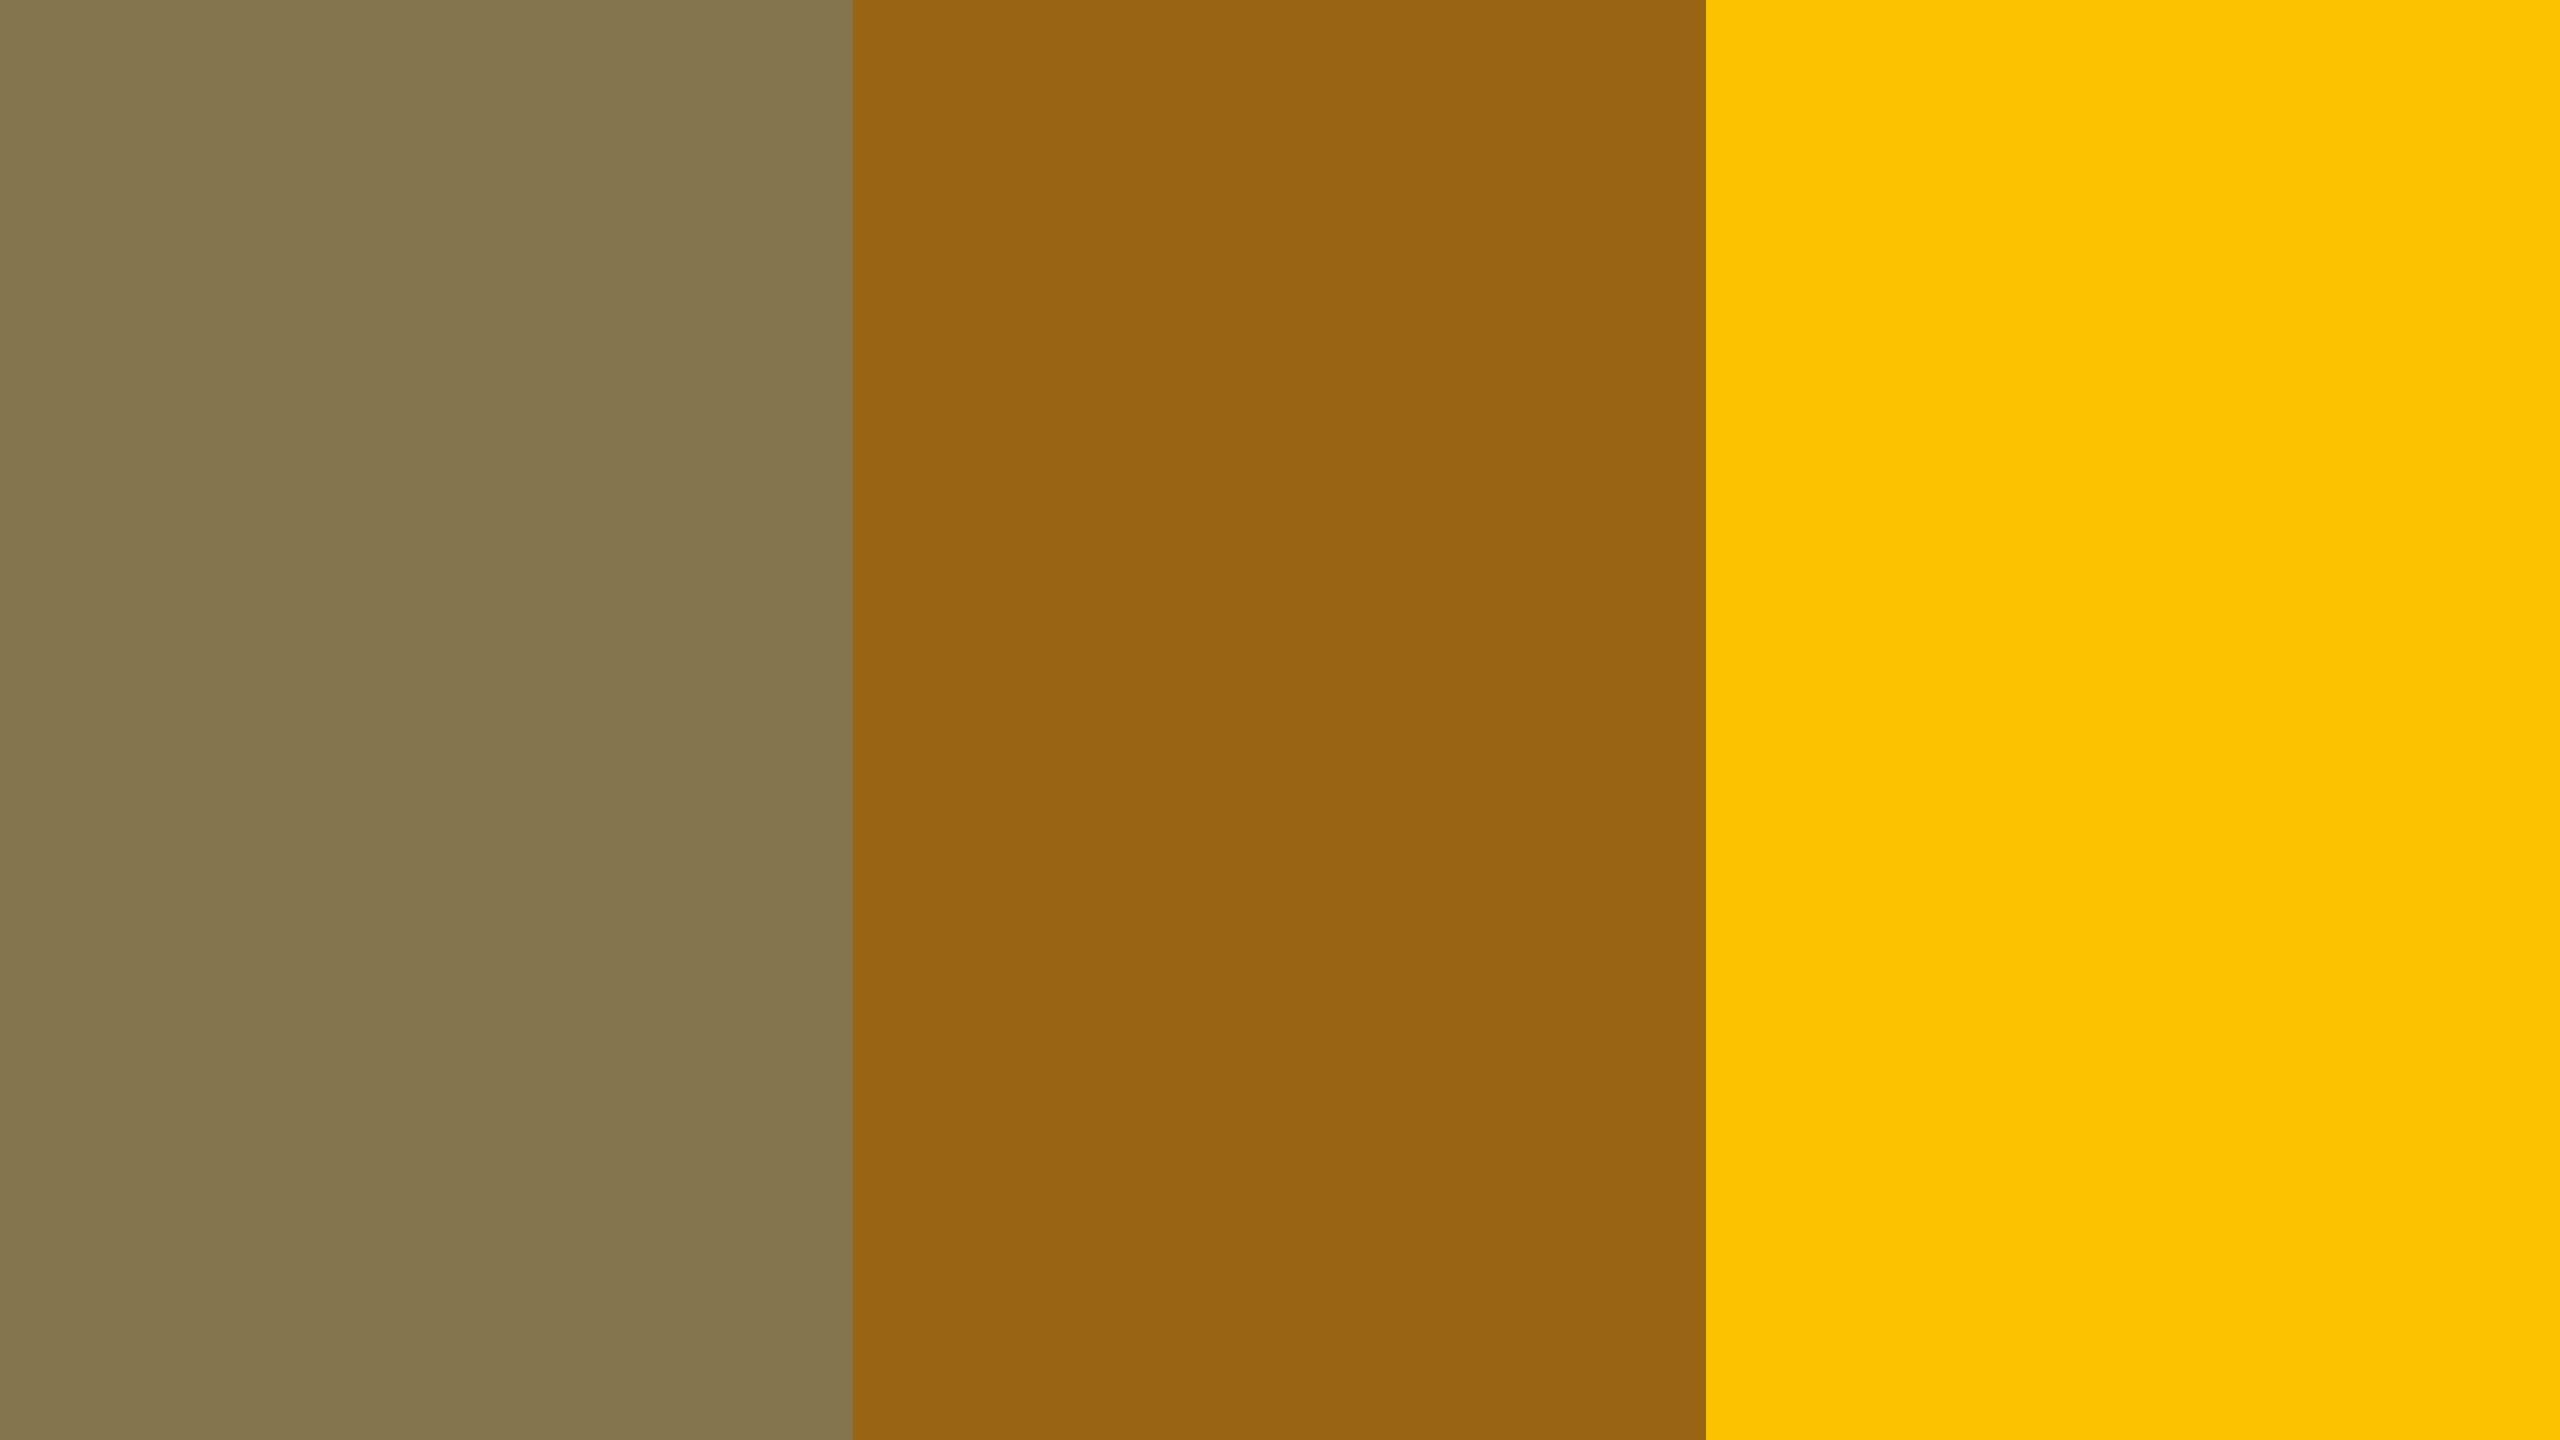 2560x1440 Gold Fusion, Golden Brown and Golden Poppy Three Color